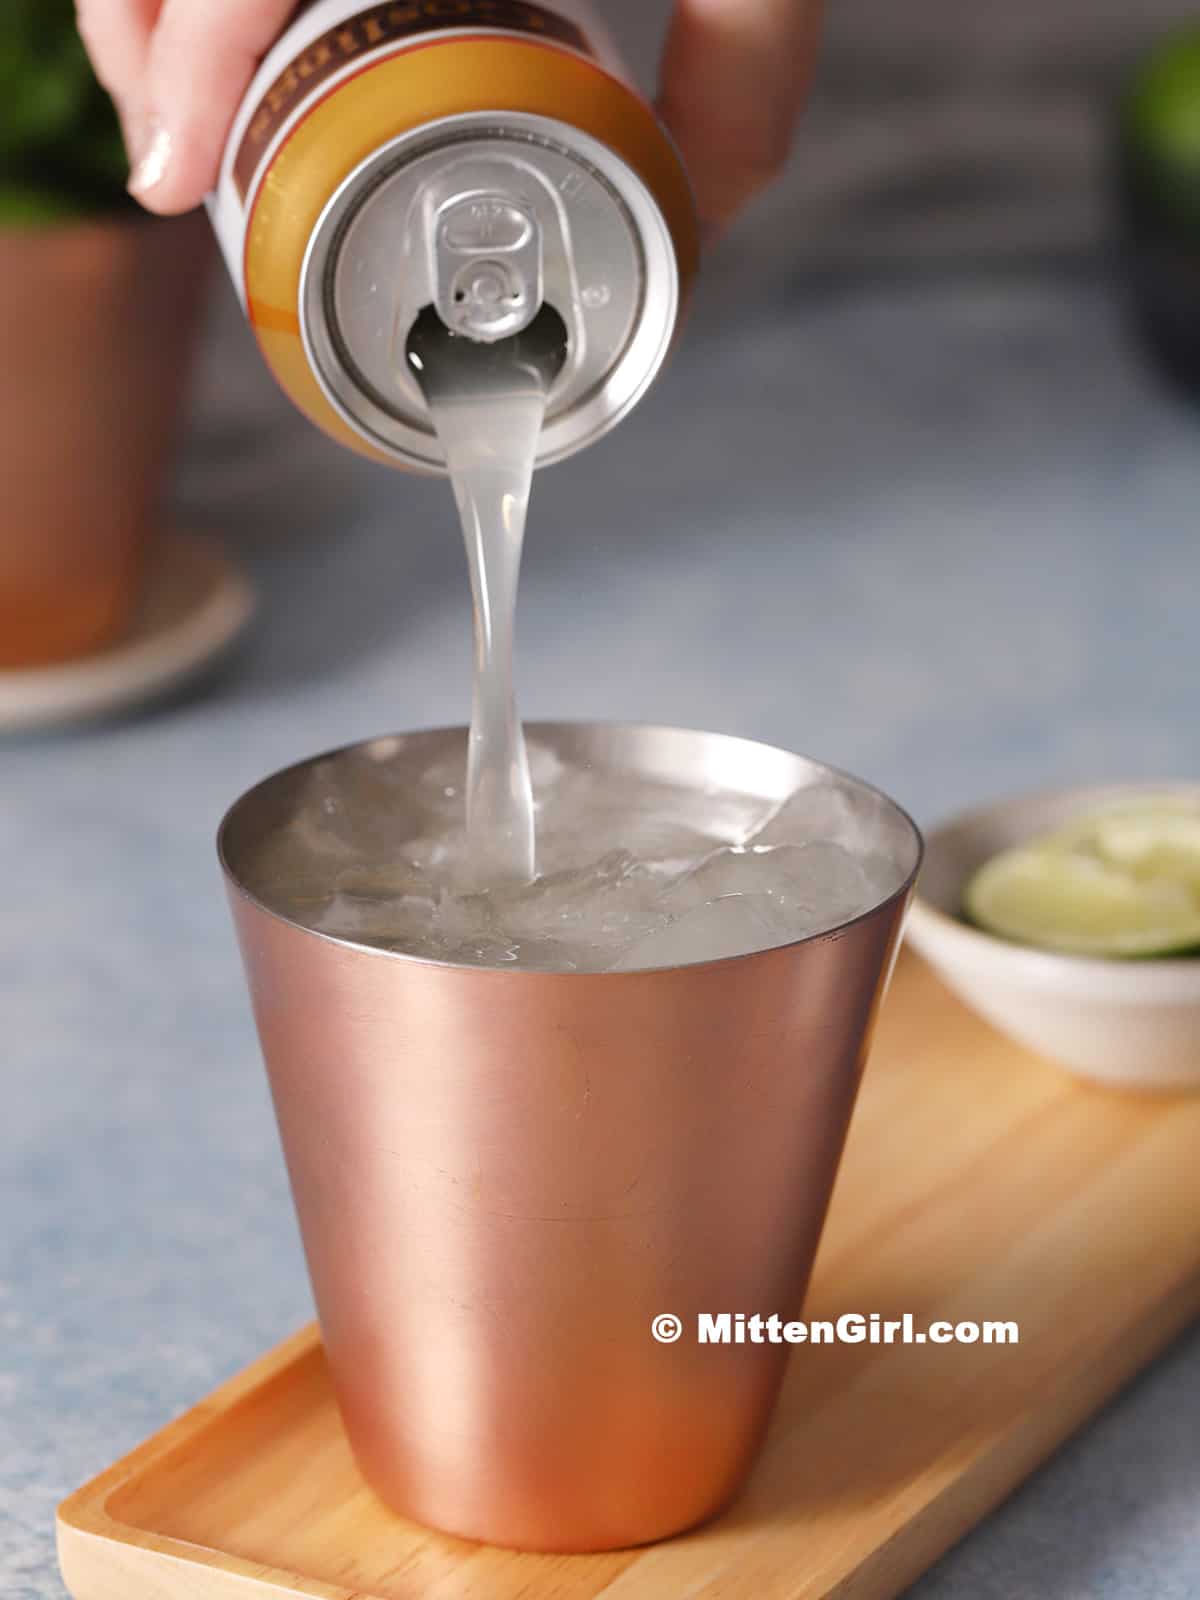 Ginger beer being poured into a copper cup.